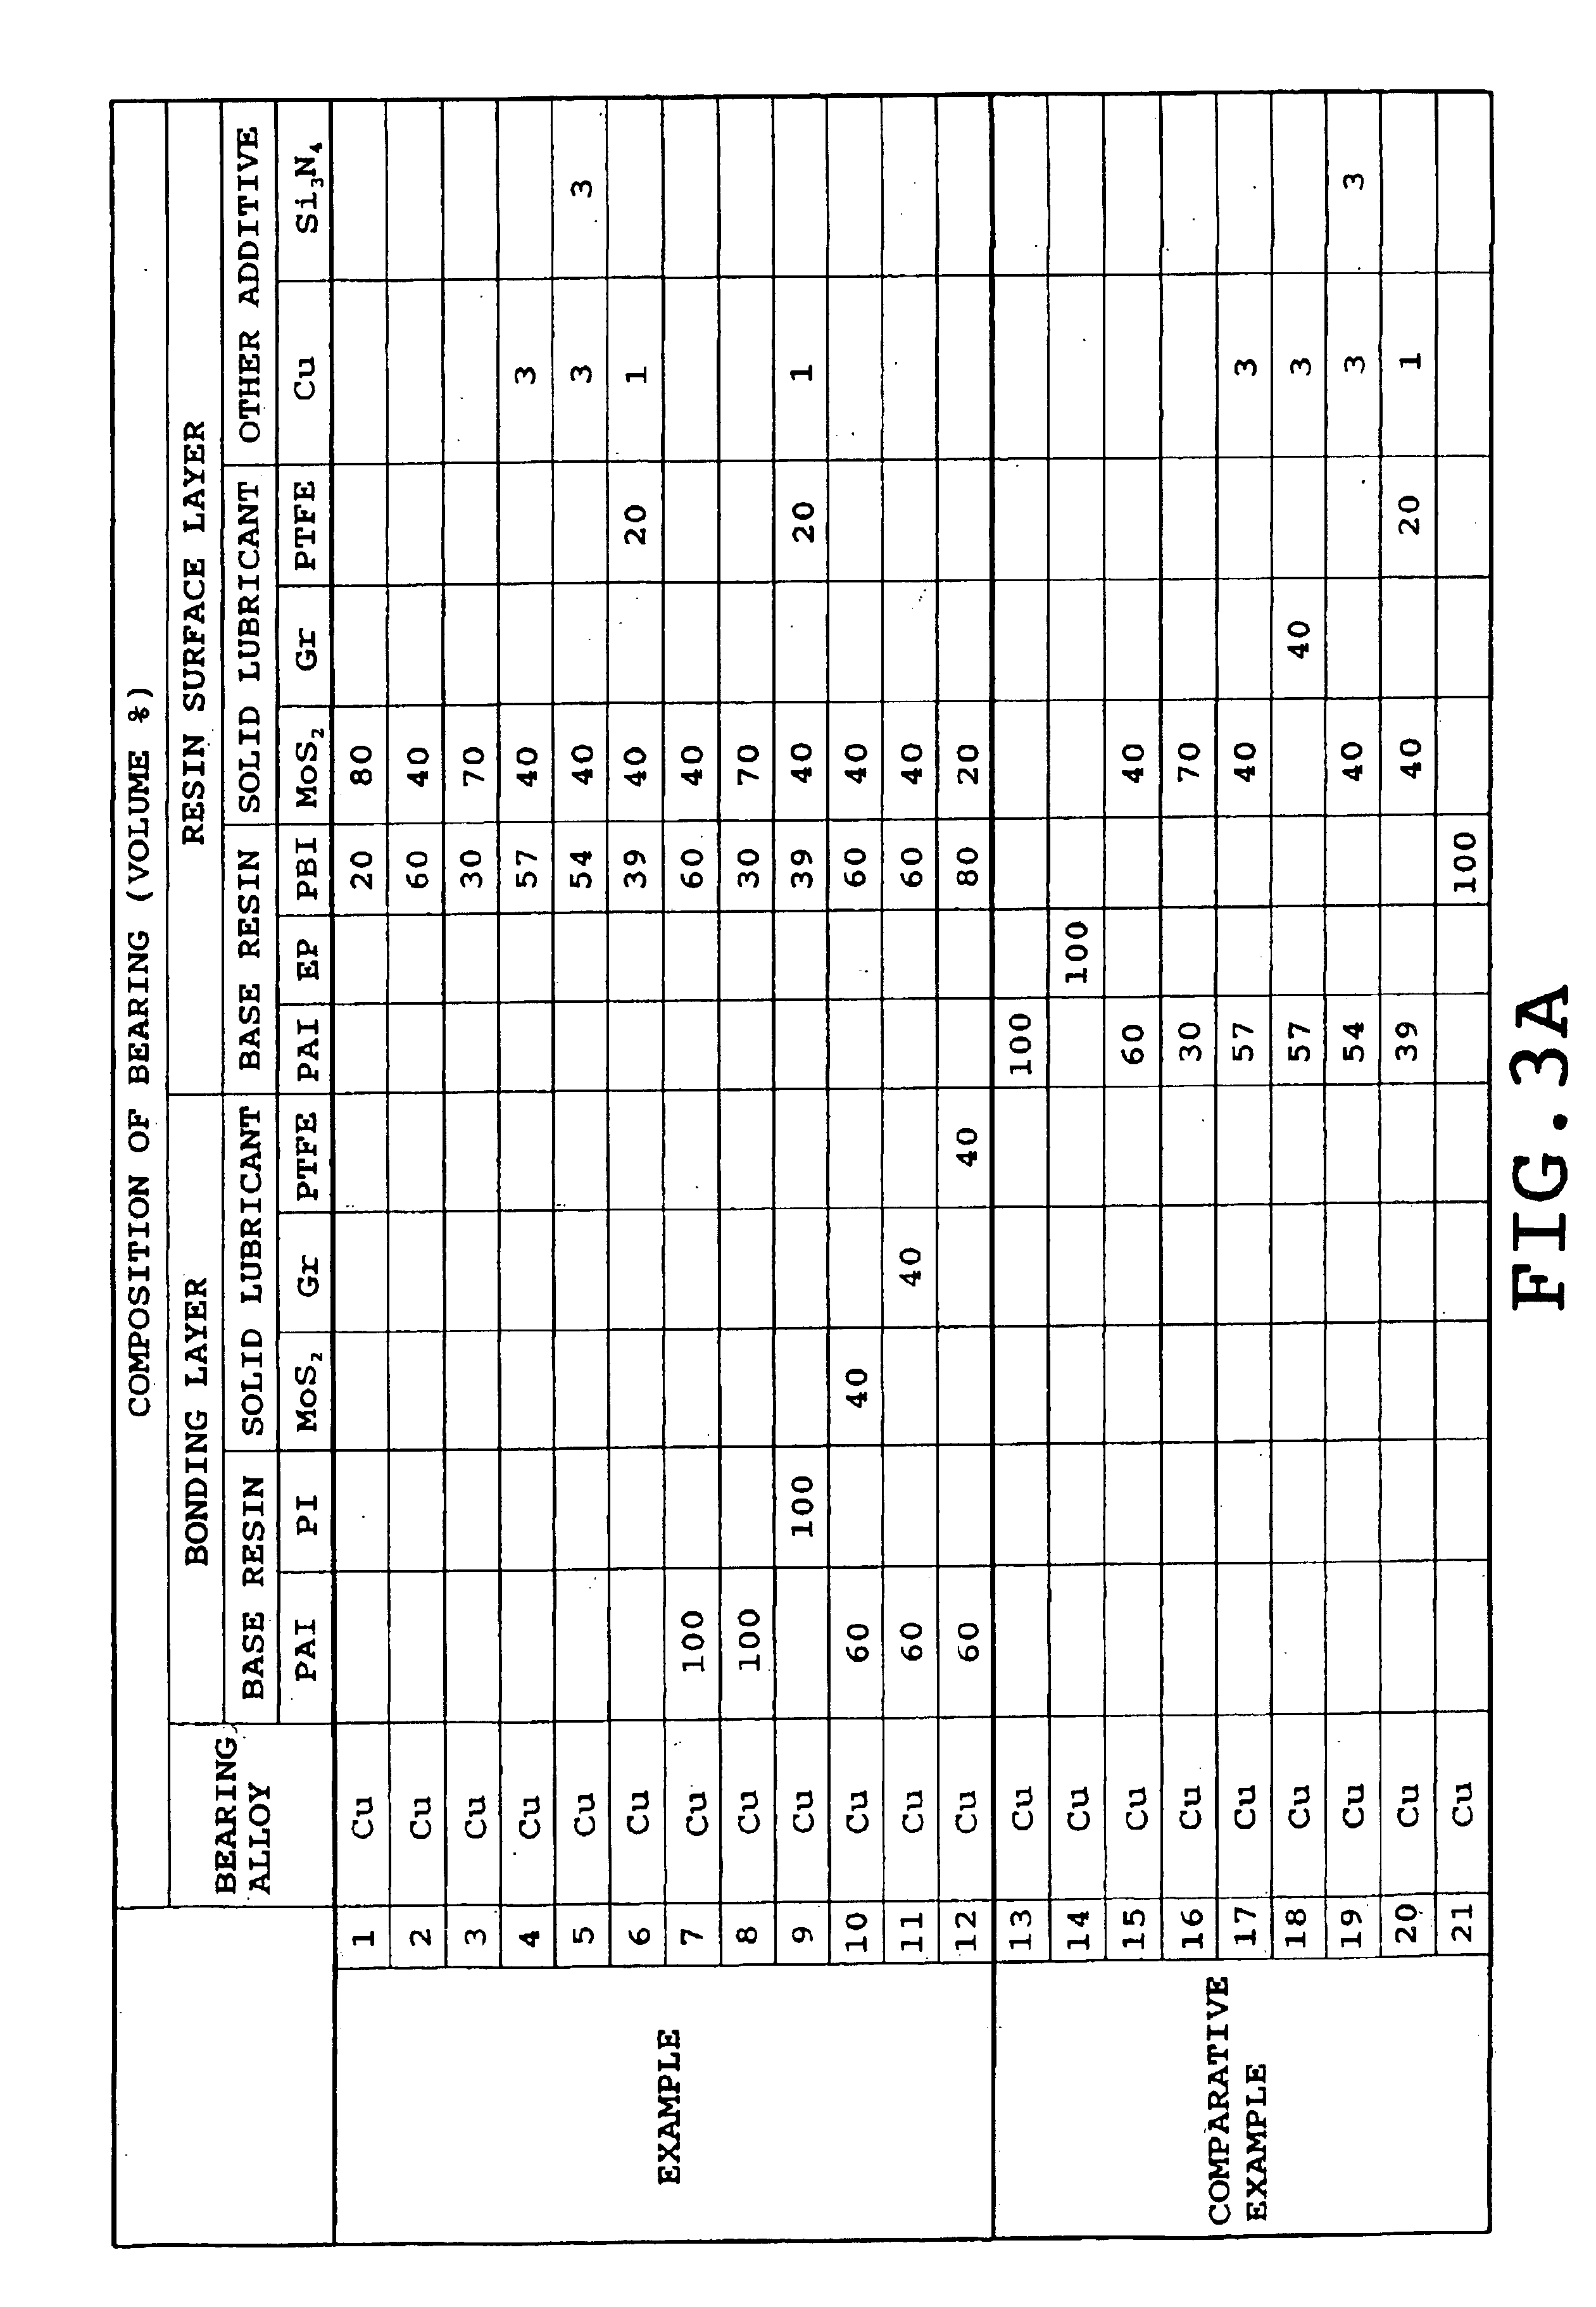 Sliding bearing and method of manufacturing the same